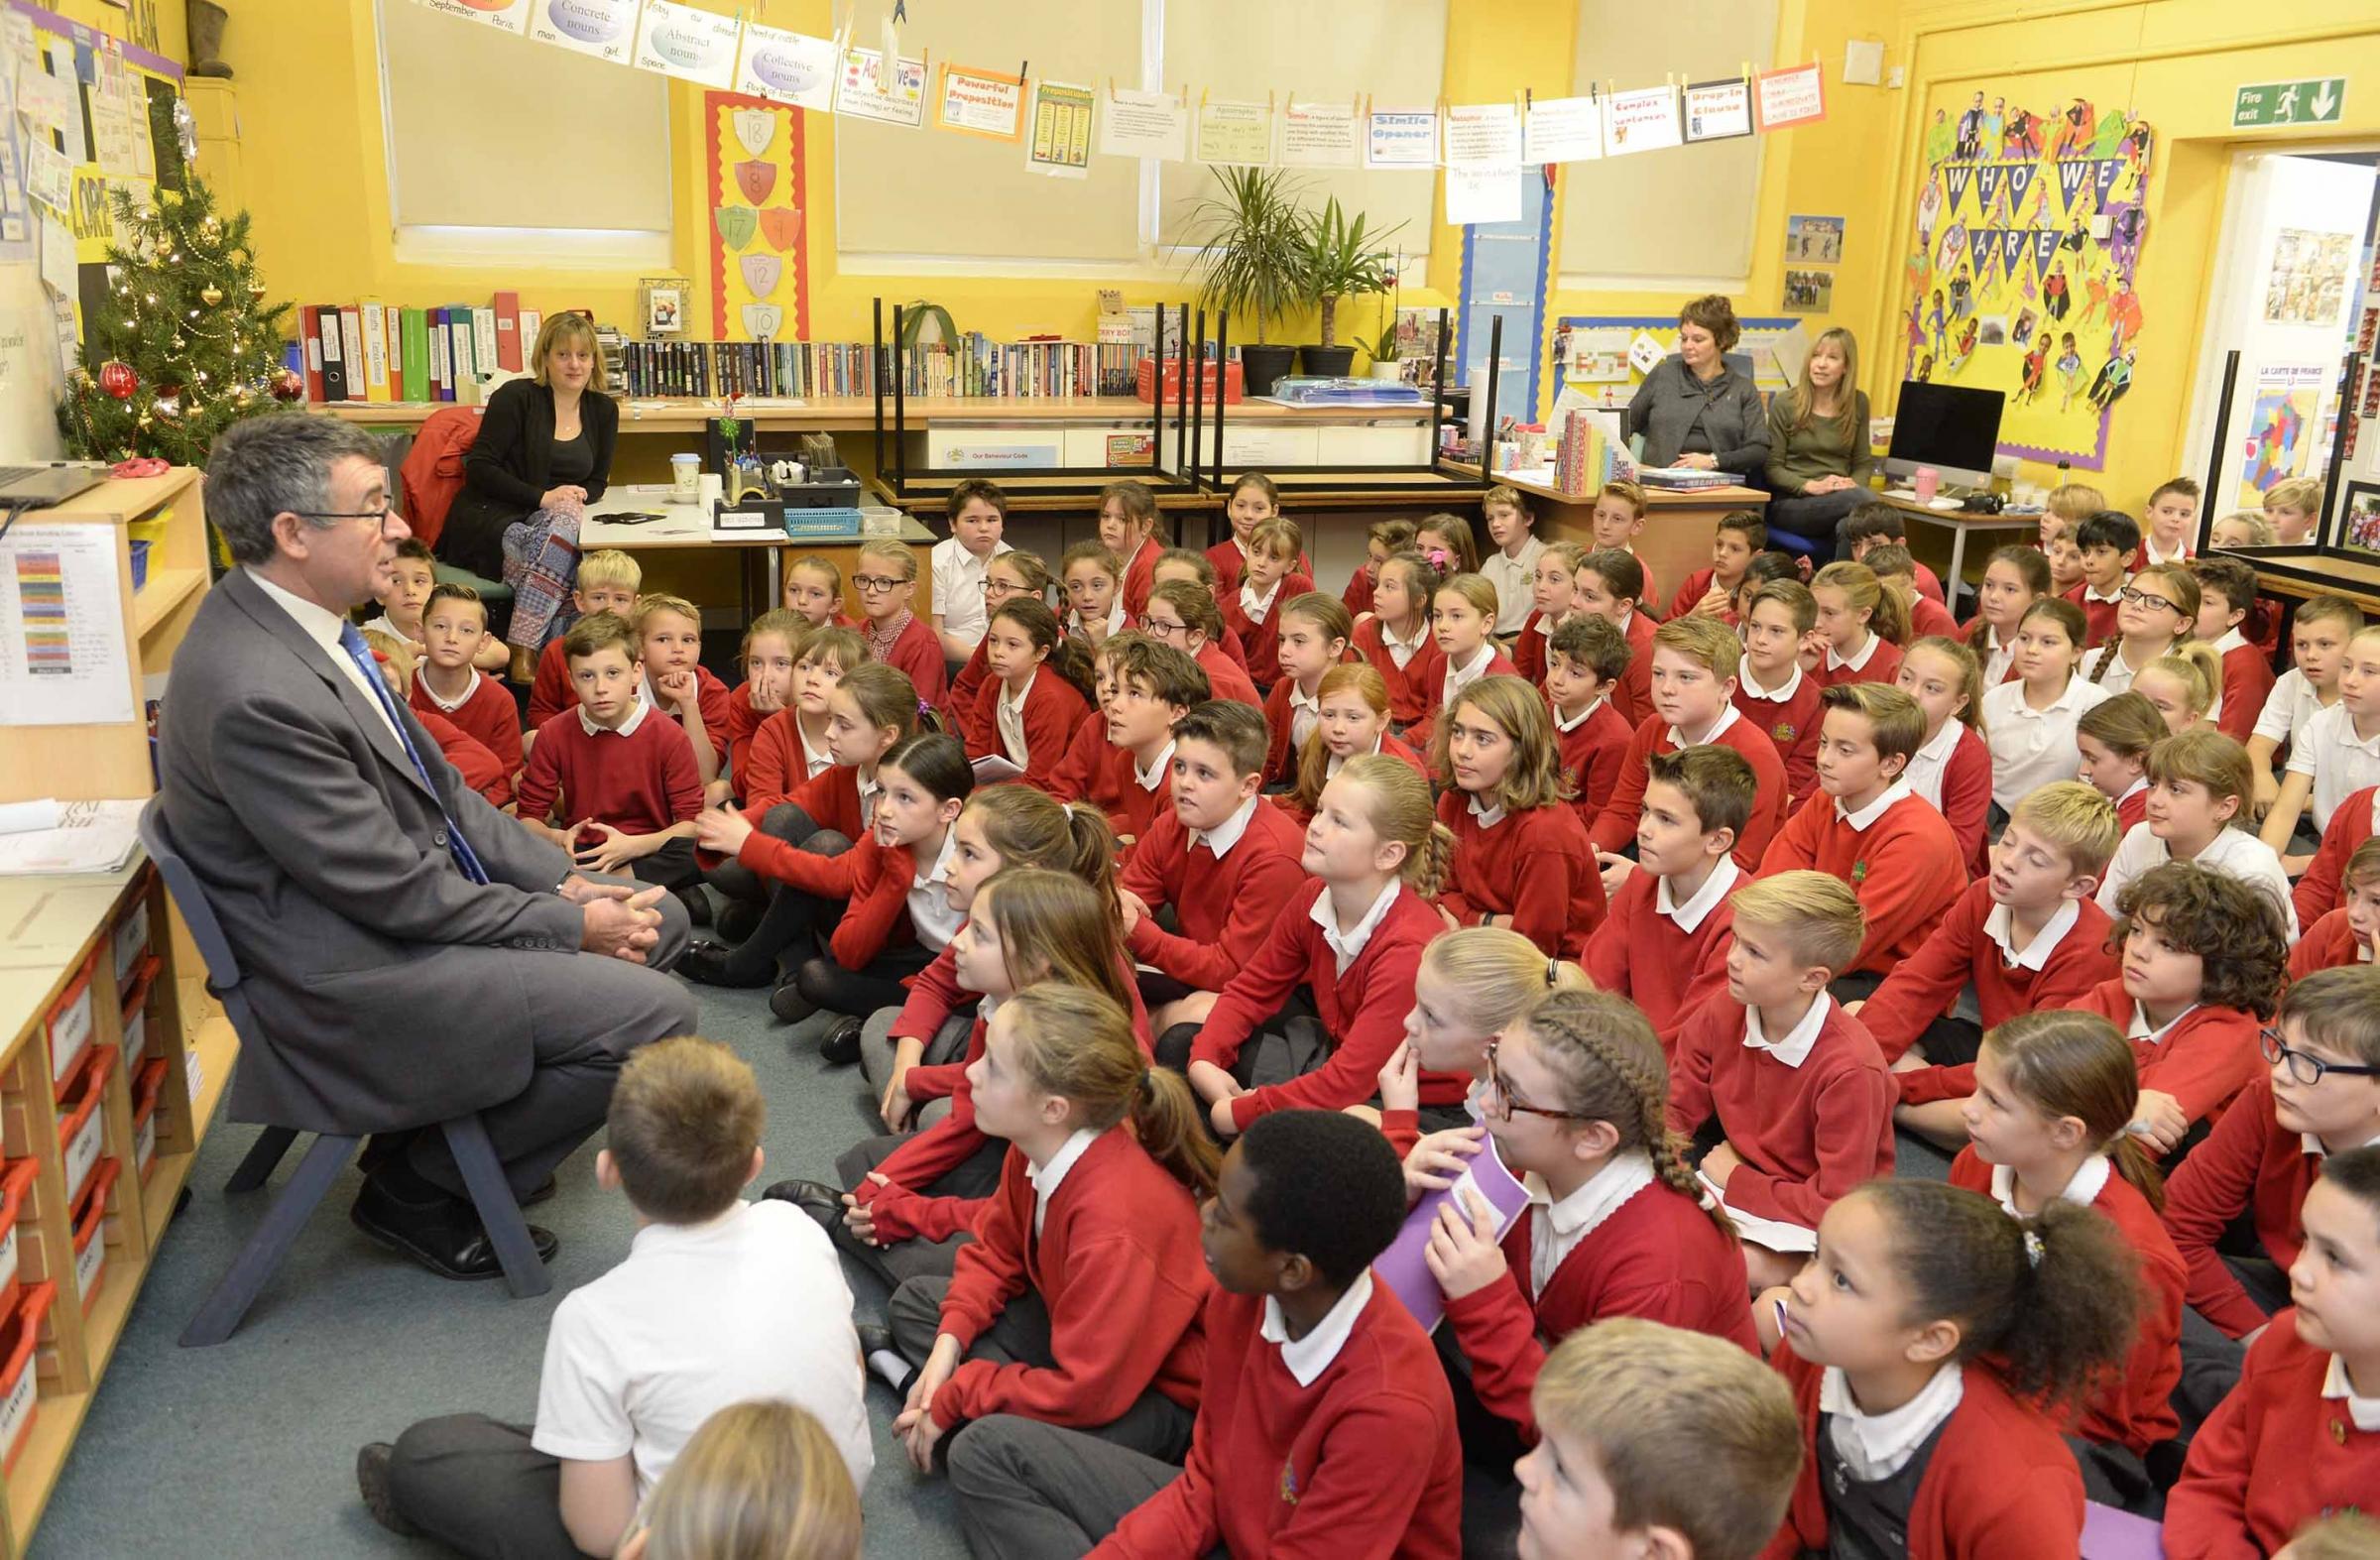 MP faces a grilling from pupils